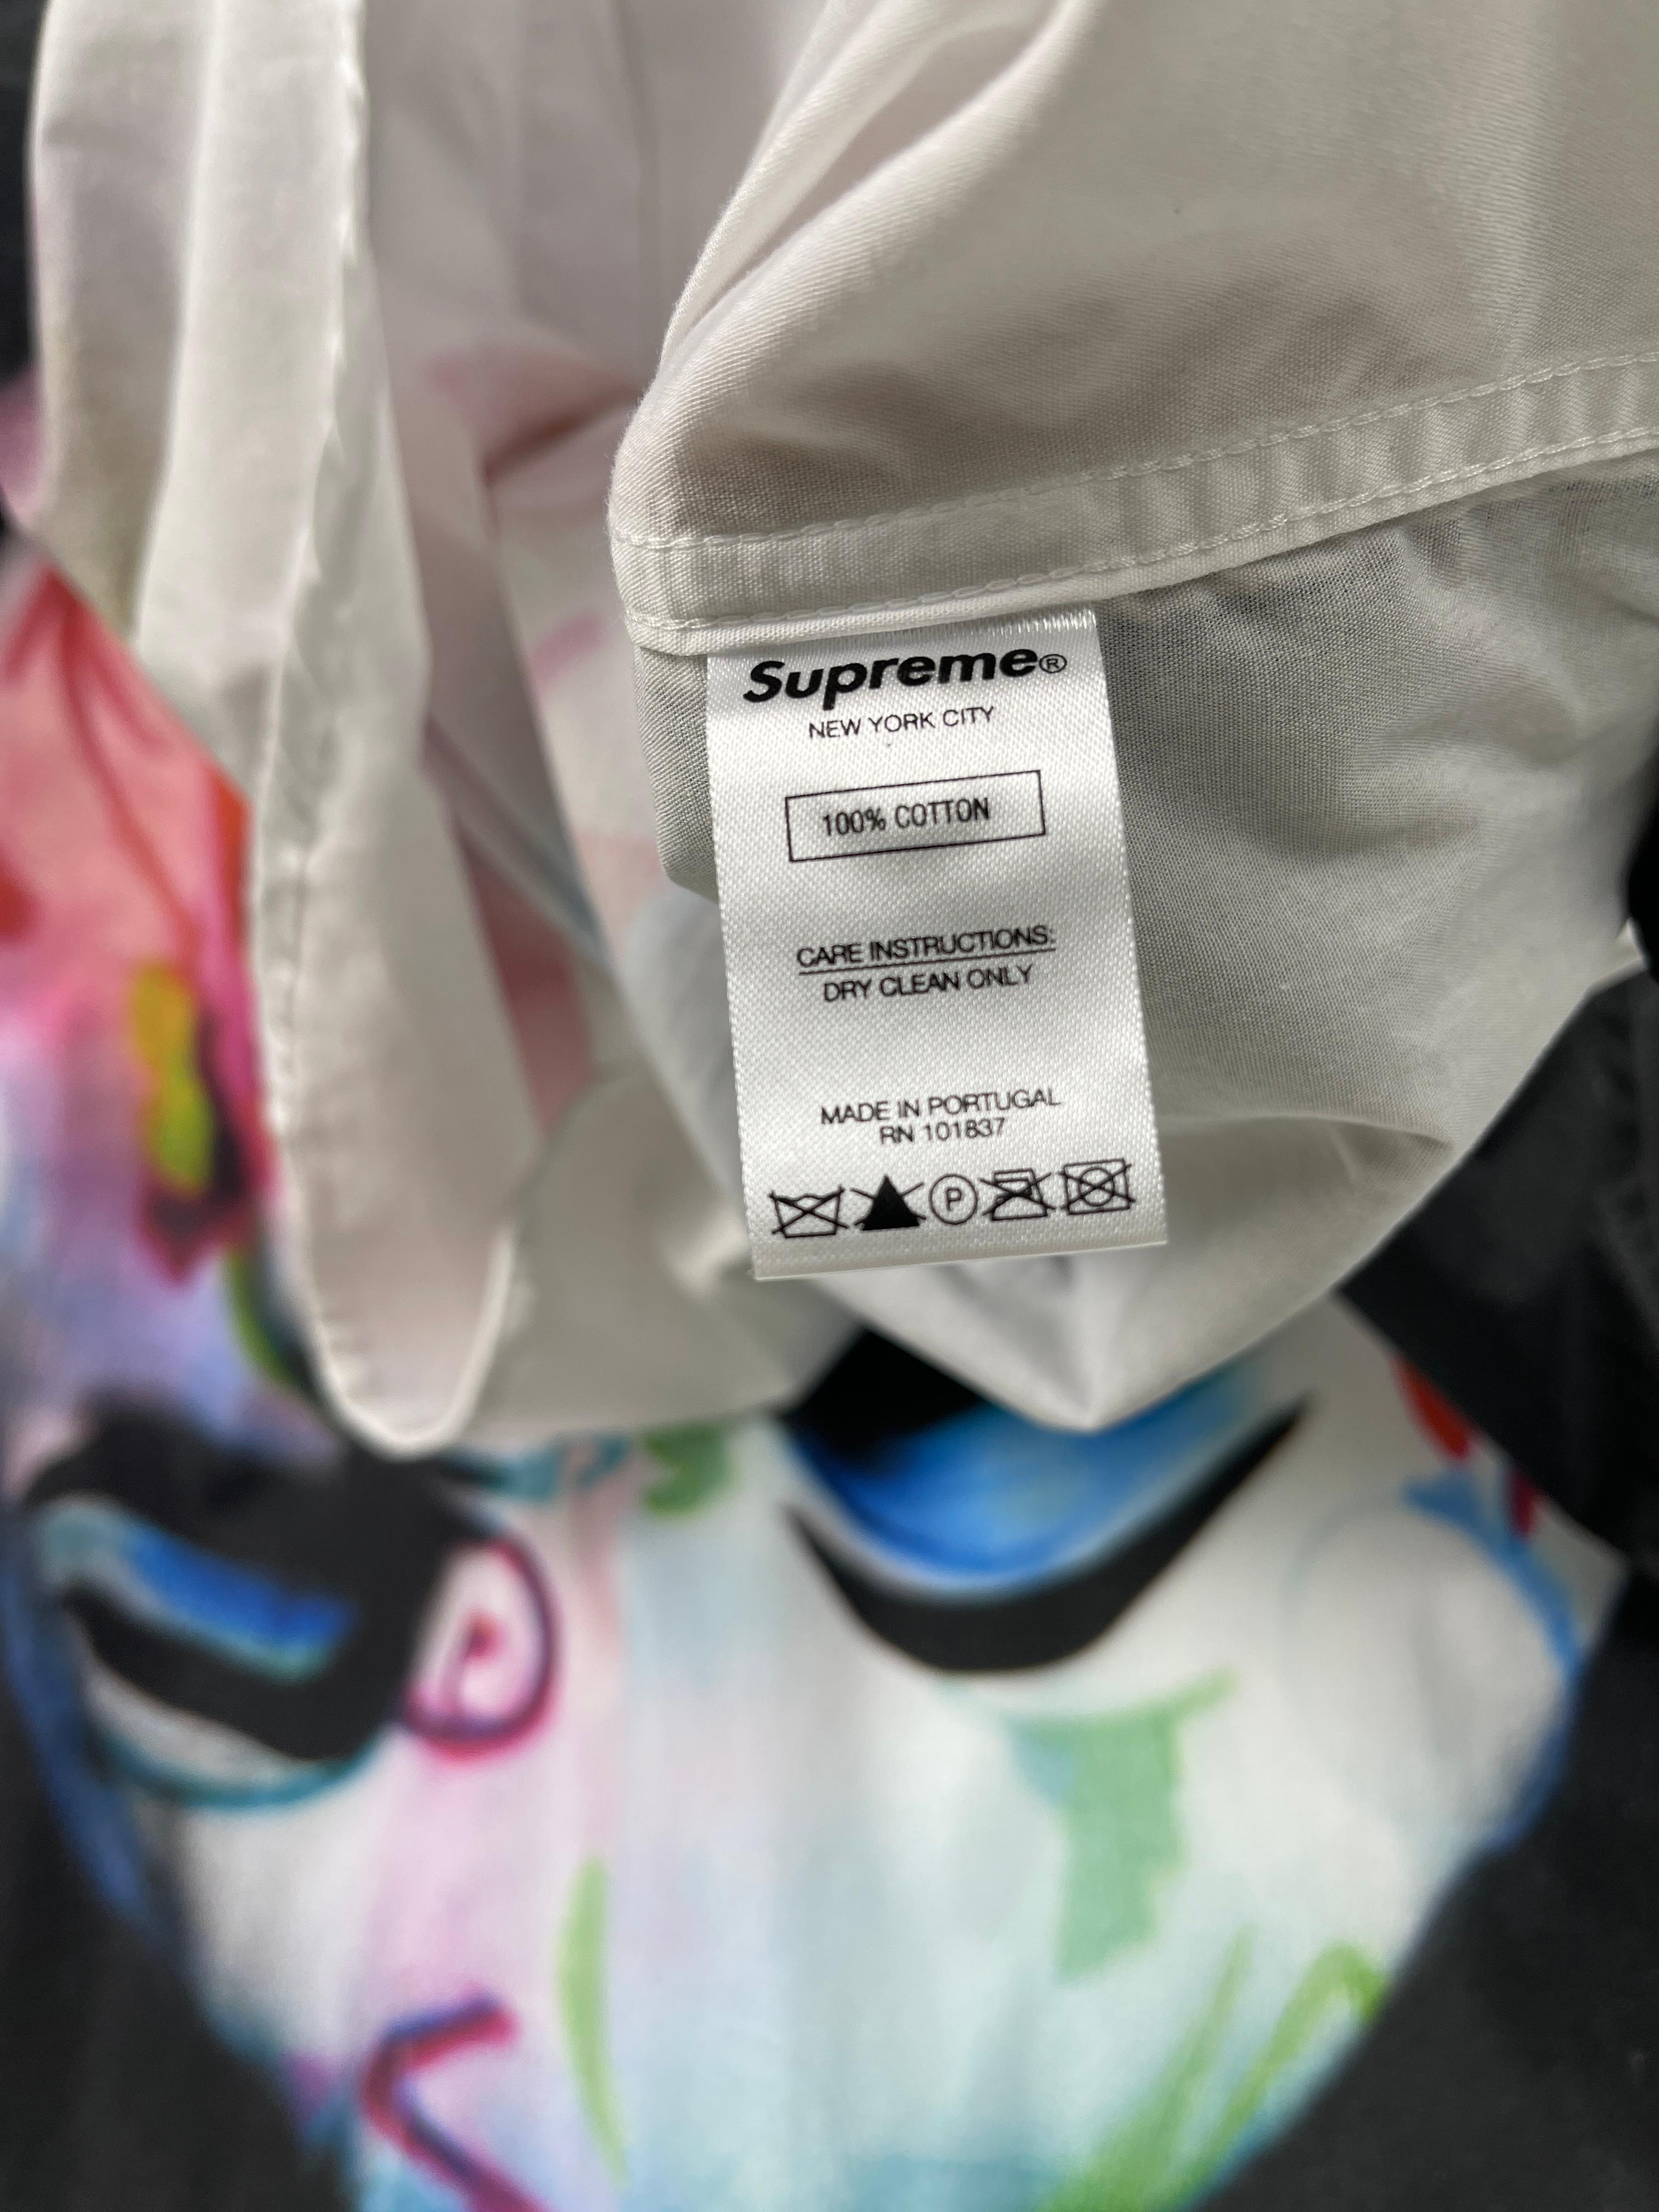 Supreme x  Leigh Bowery Watercolor Shirt In Excellent Condition For Sale In Tương Mai Ward, Hoang Mai District